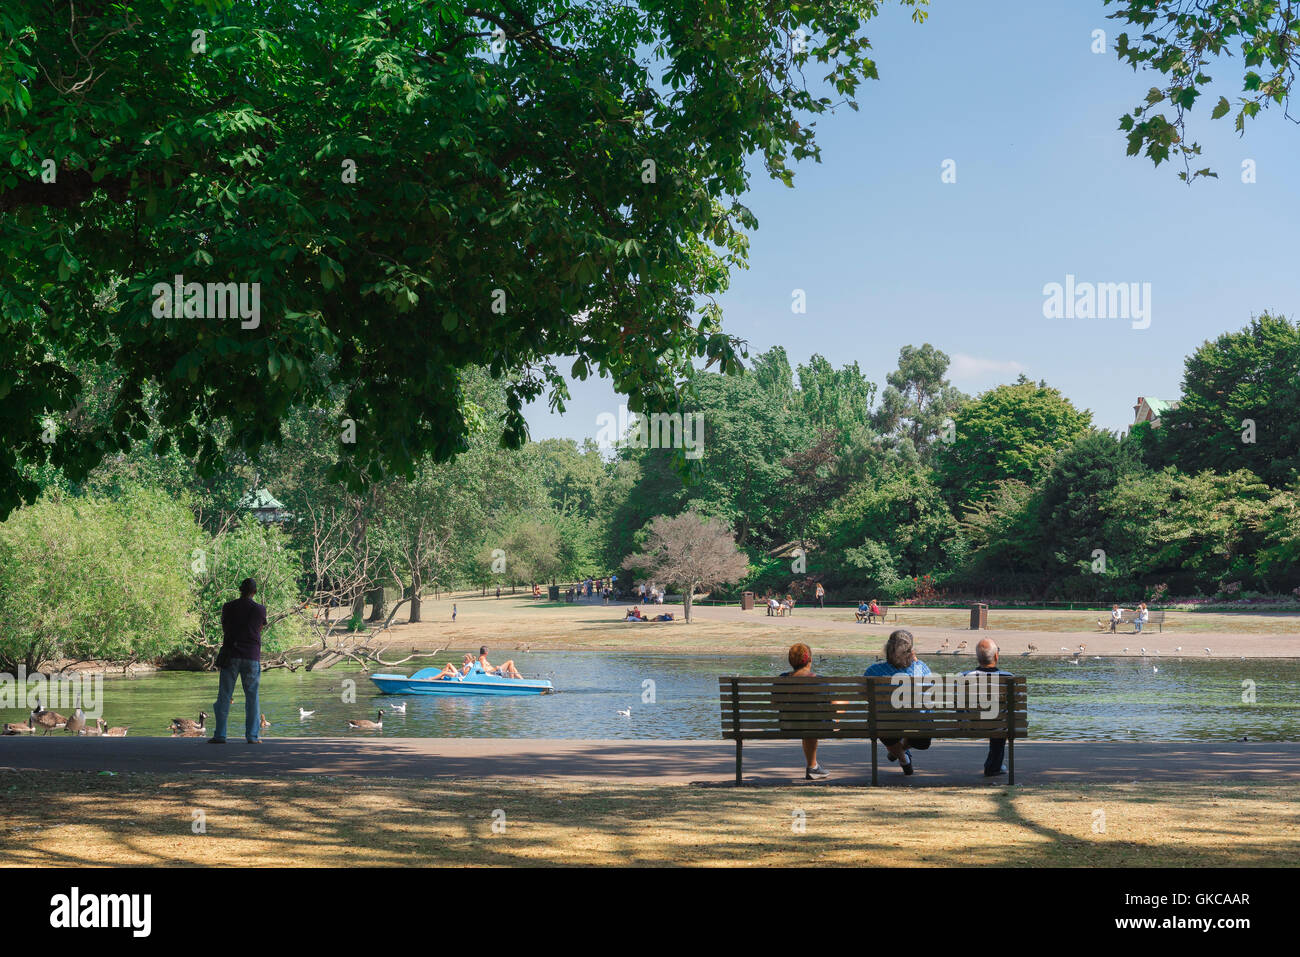 Regent's Park London, view on a summer afternoon of tourists seated on a bench watching people on the boating lake, UK. Stock Photo